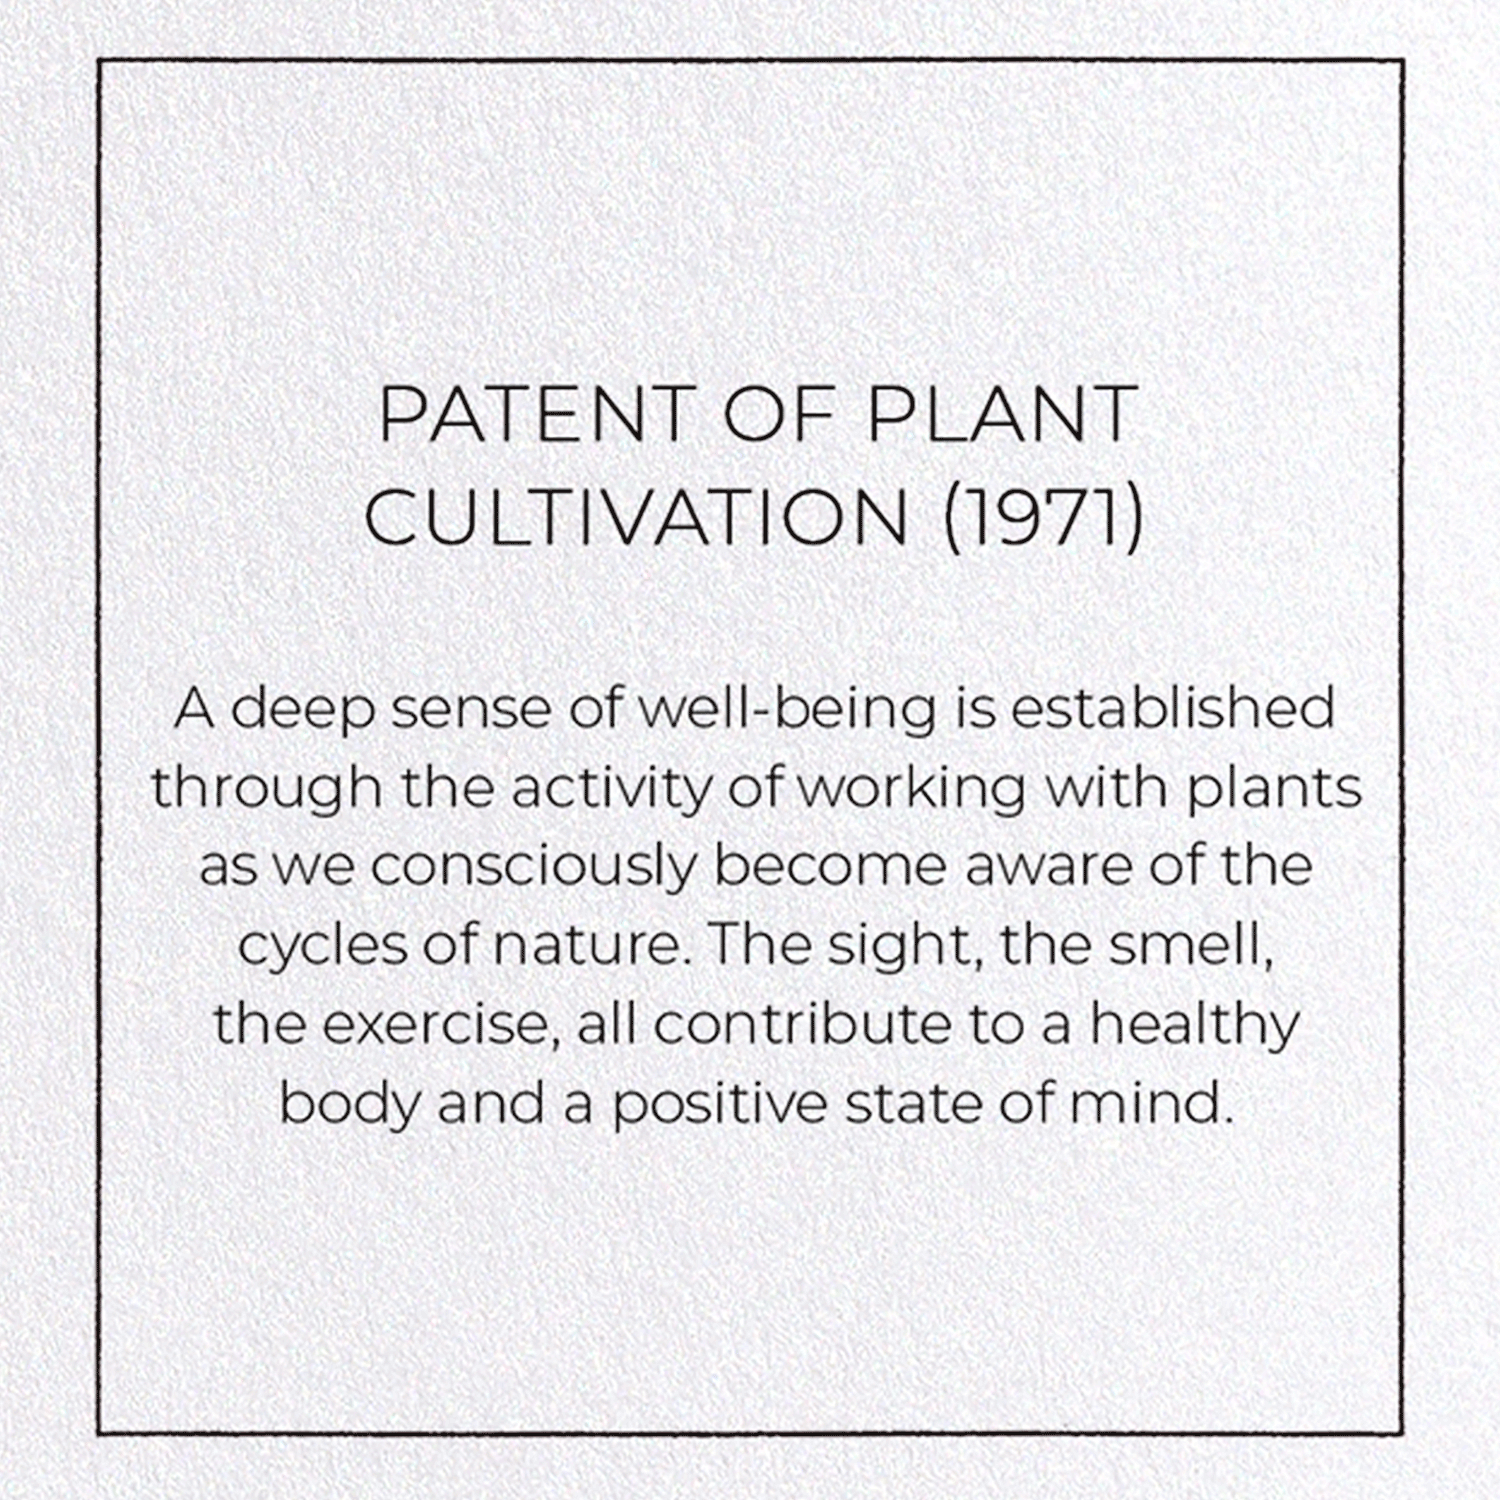 PATENT OF PLANT CULTIVATION (1971)